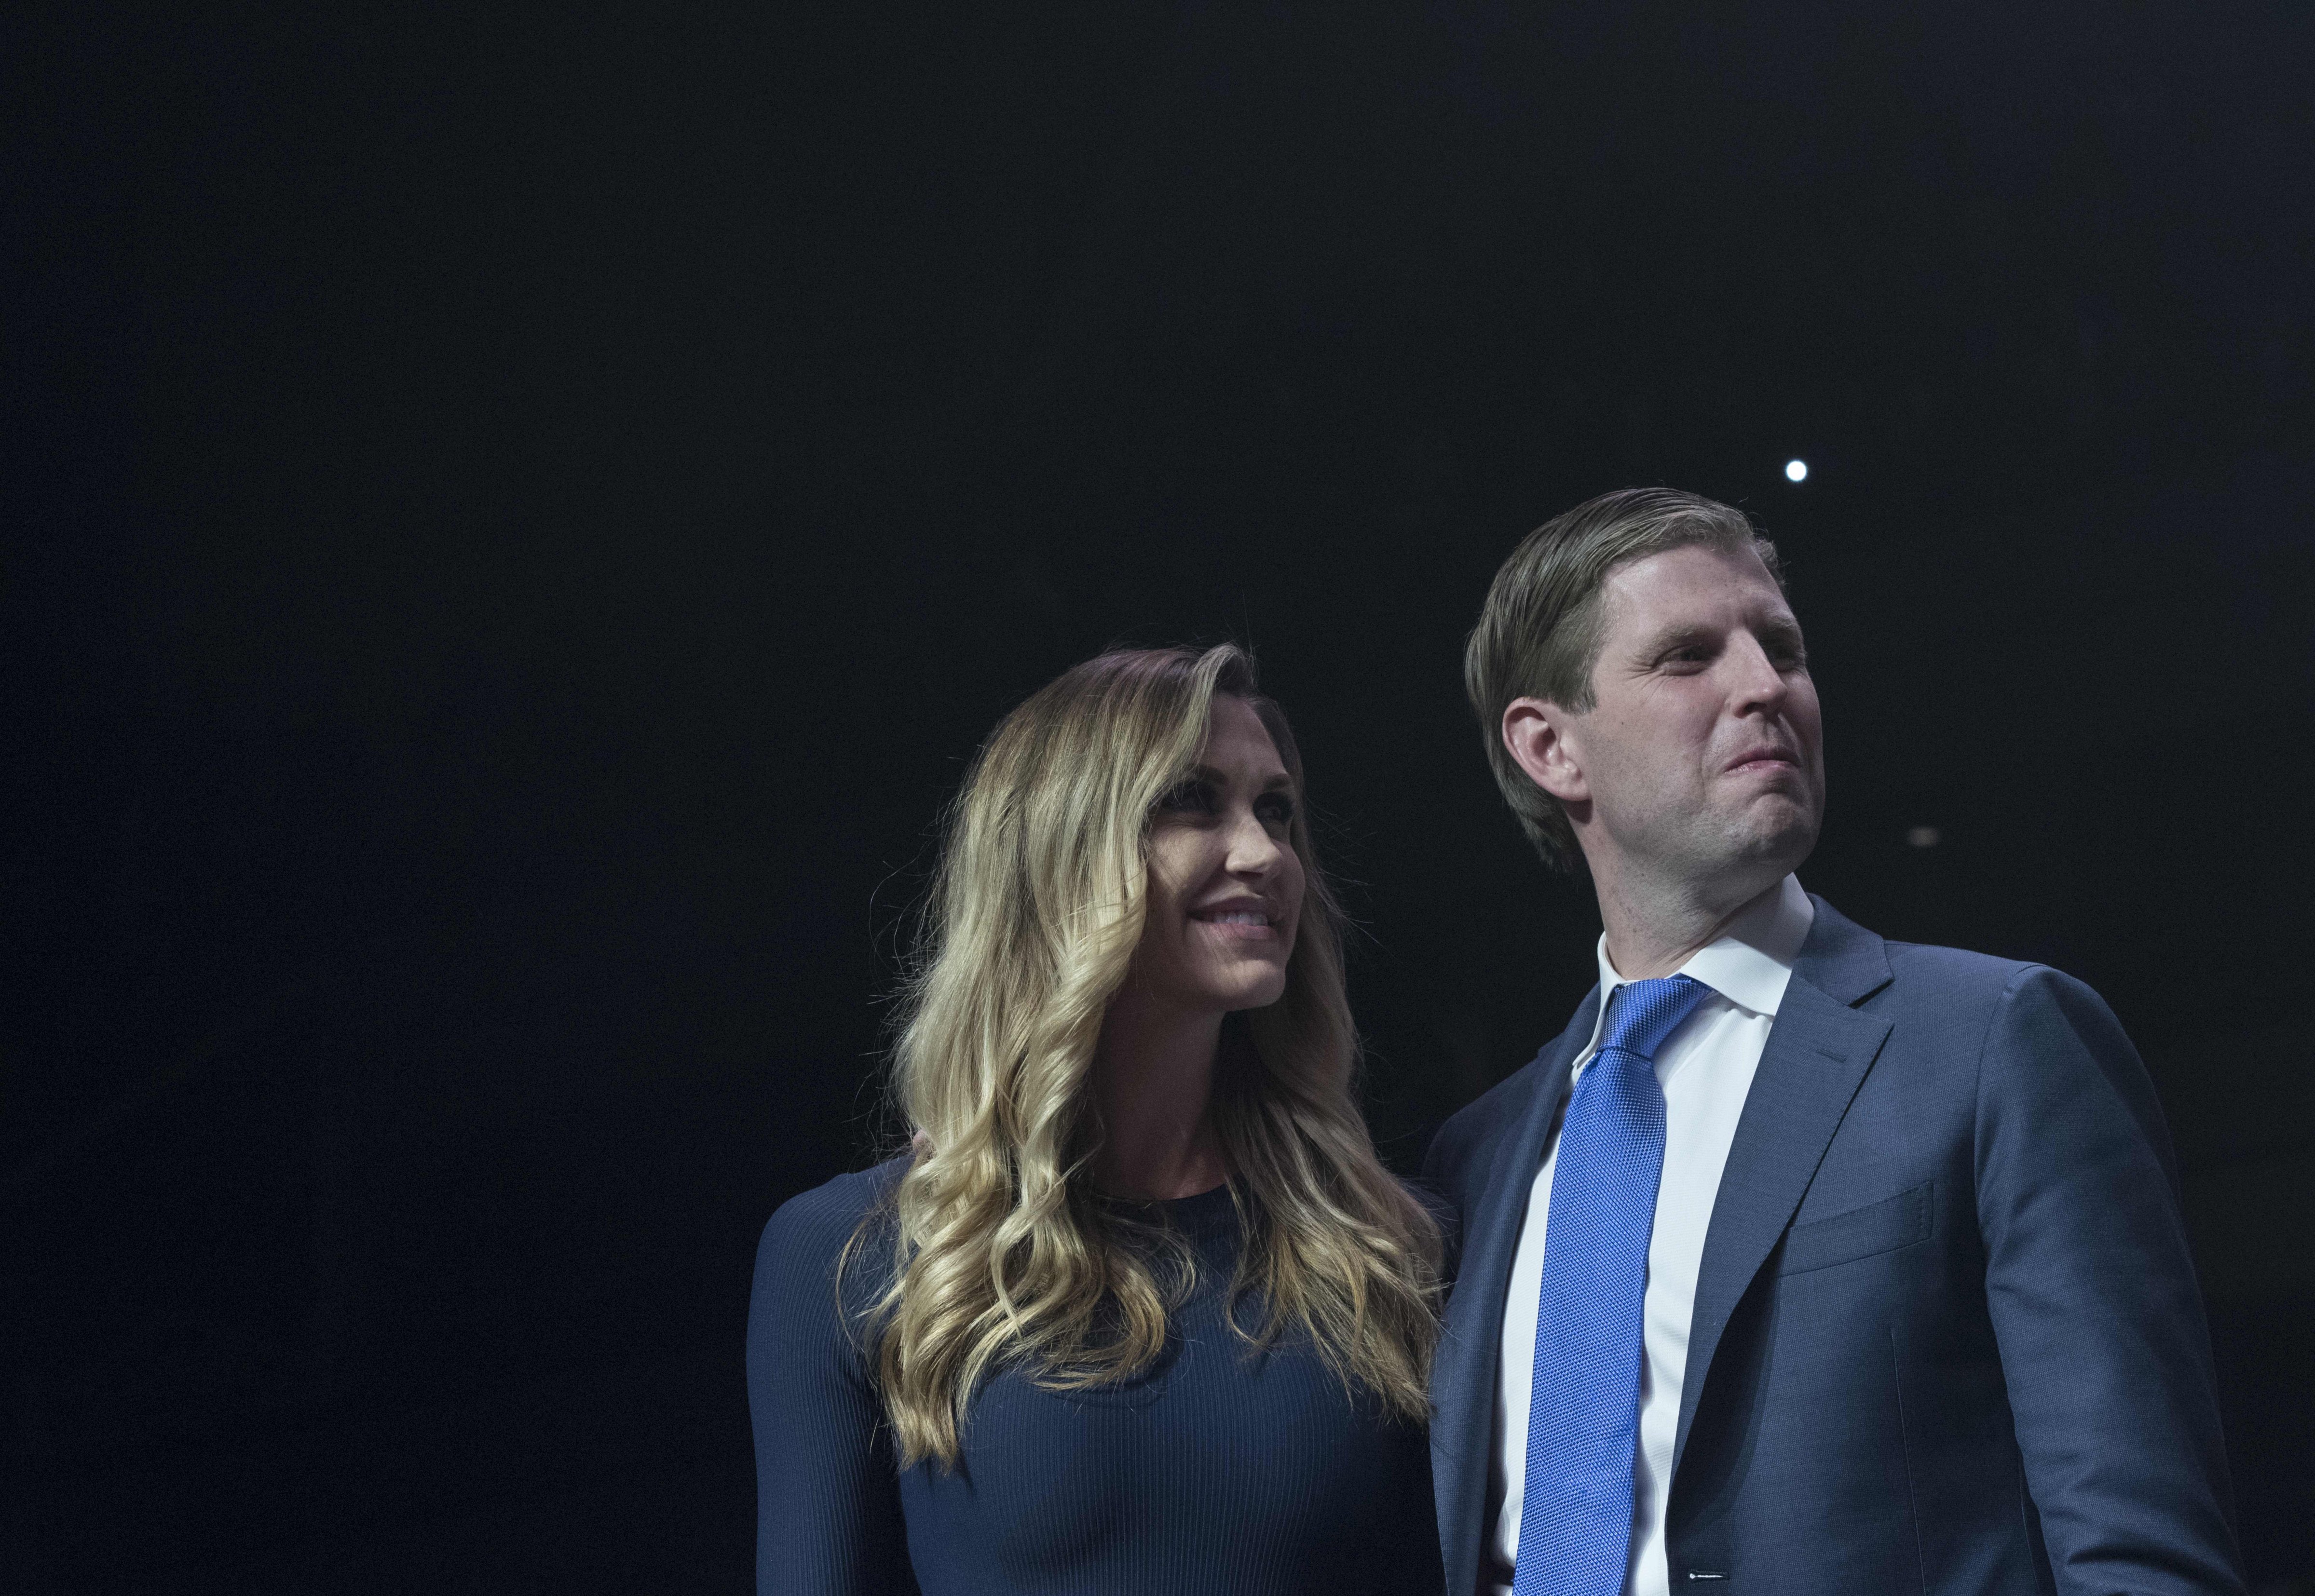 Eric Trump and his wife Lara watch Republican presidential nominee Donald Trump speak at rally at the SNHU Arena in Manchester, New Hampshire on November 7, 2016. (MANDEL NGAN—AFP/Getty Images)